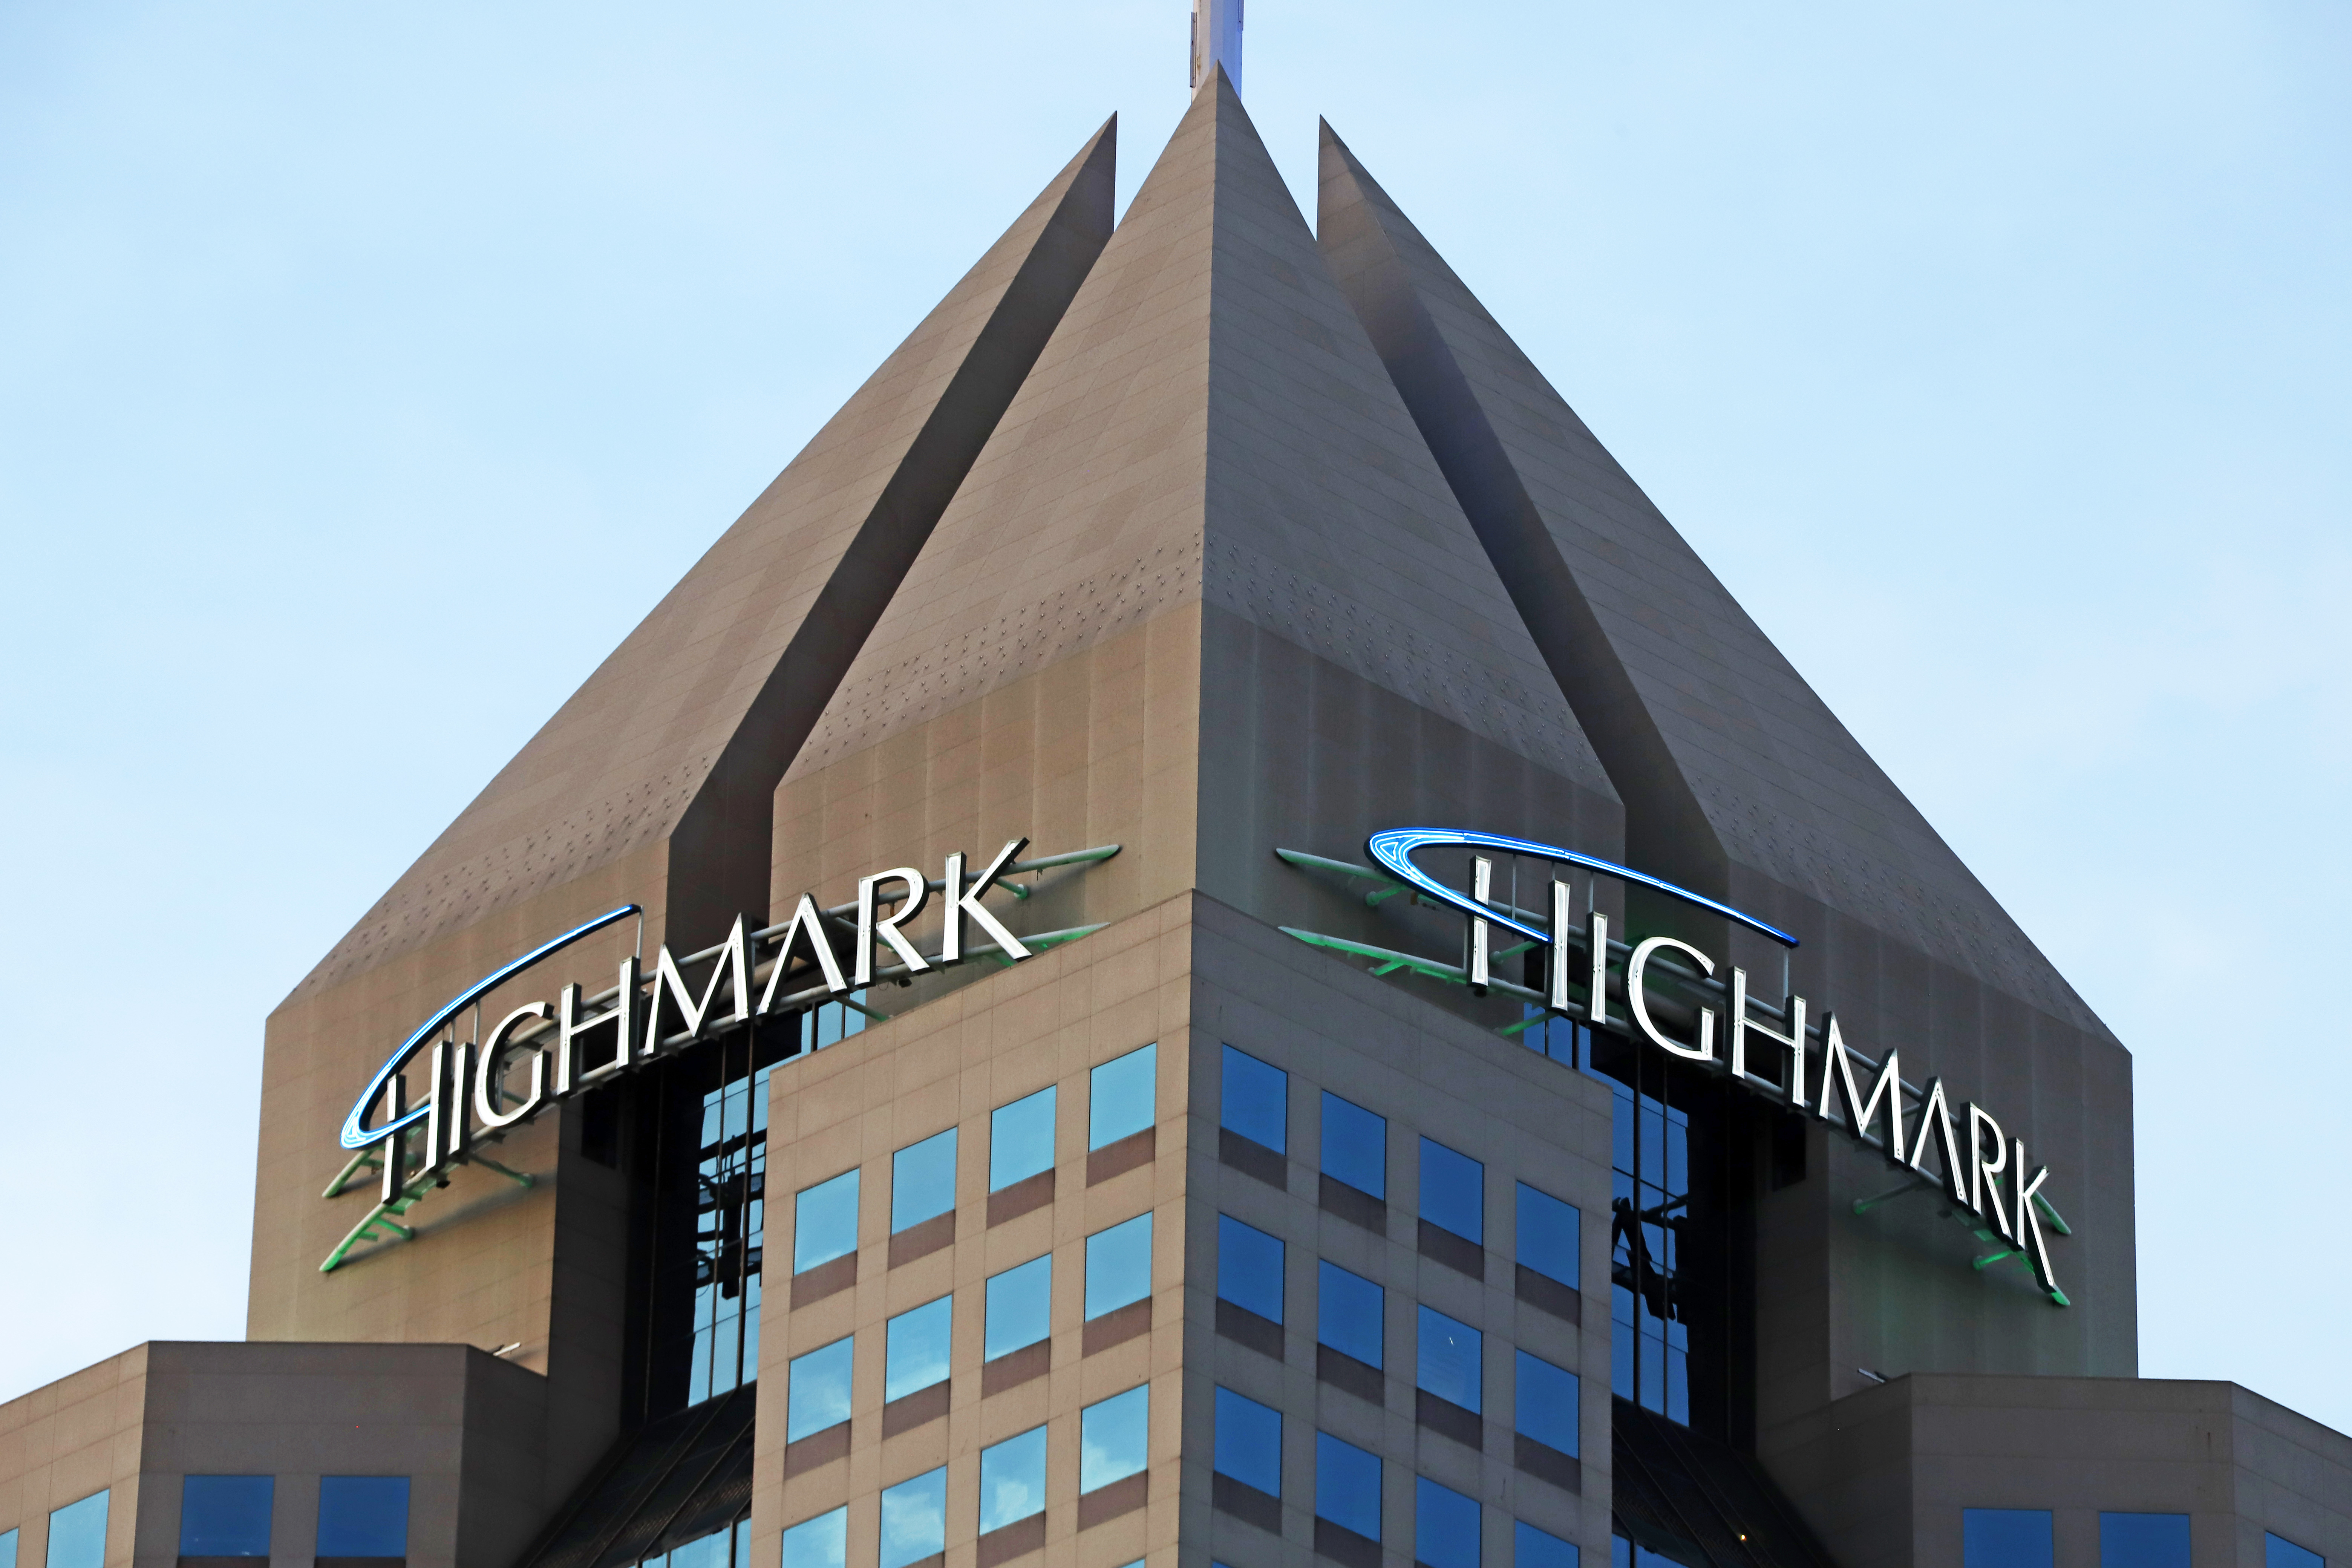 Highmark bcbs pittsburgh careers carefirst bluecross state of maryland